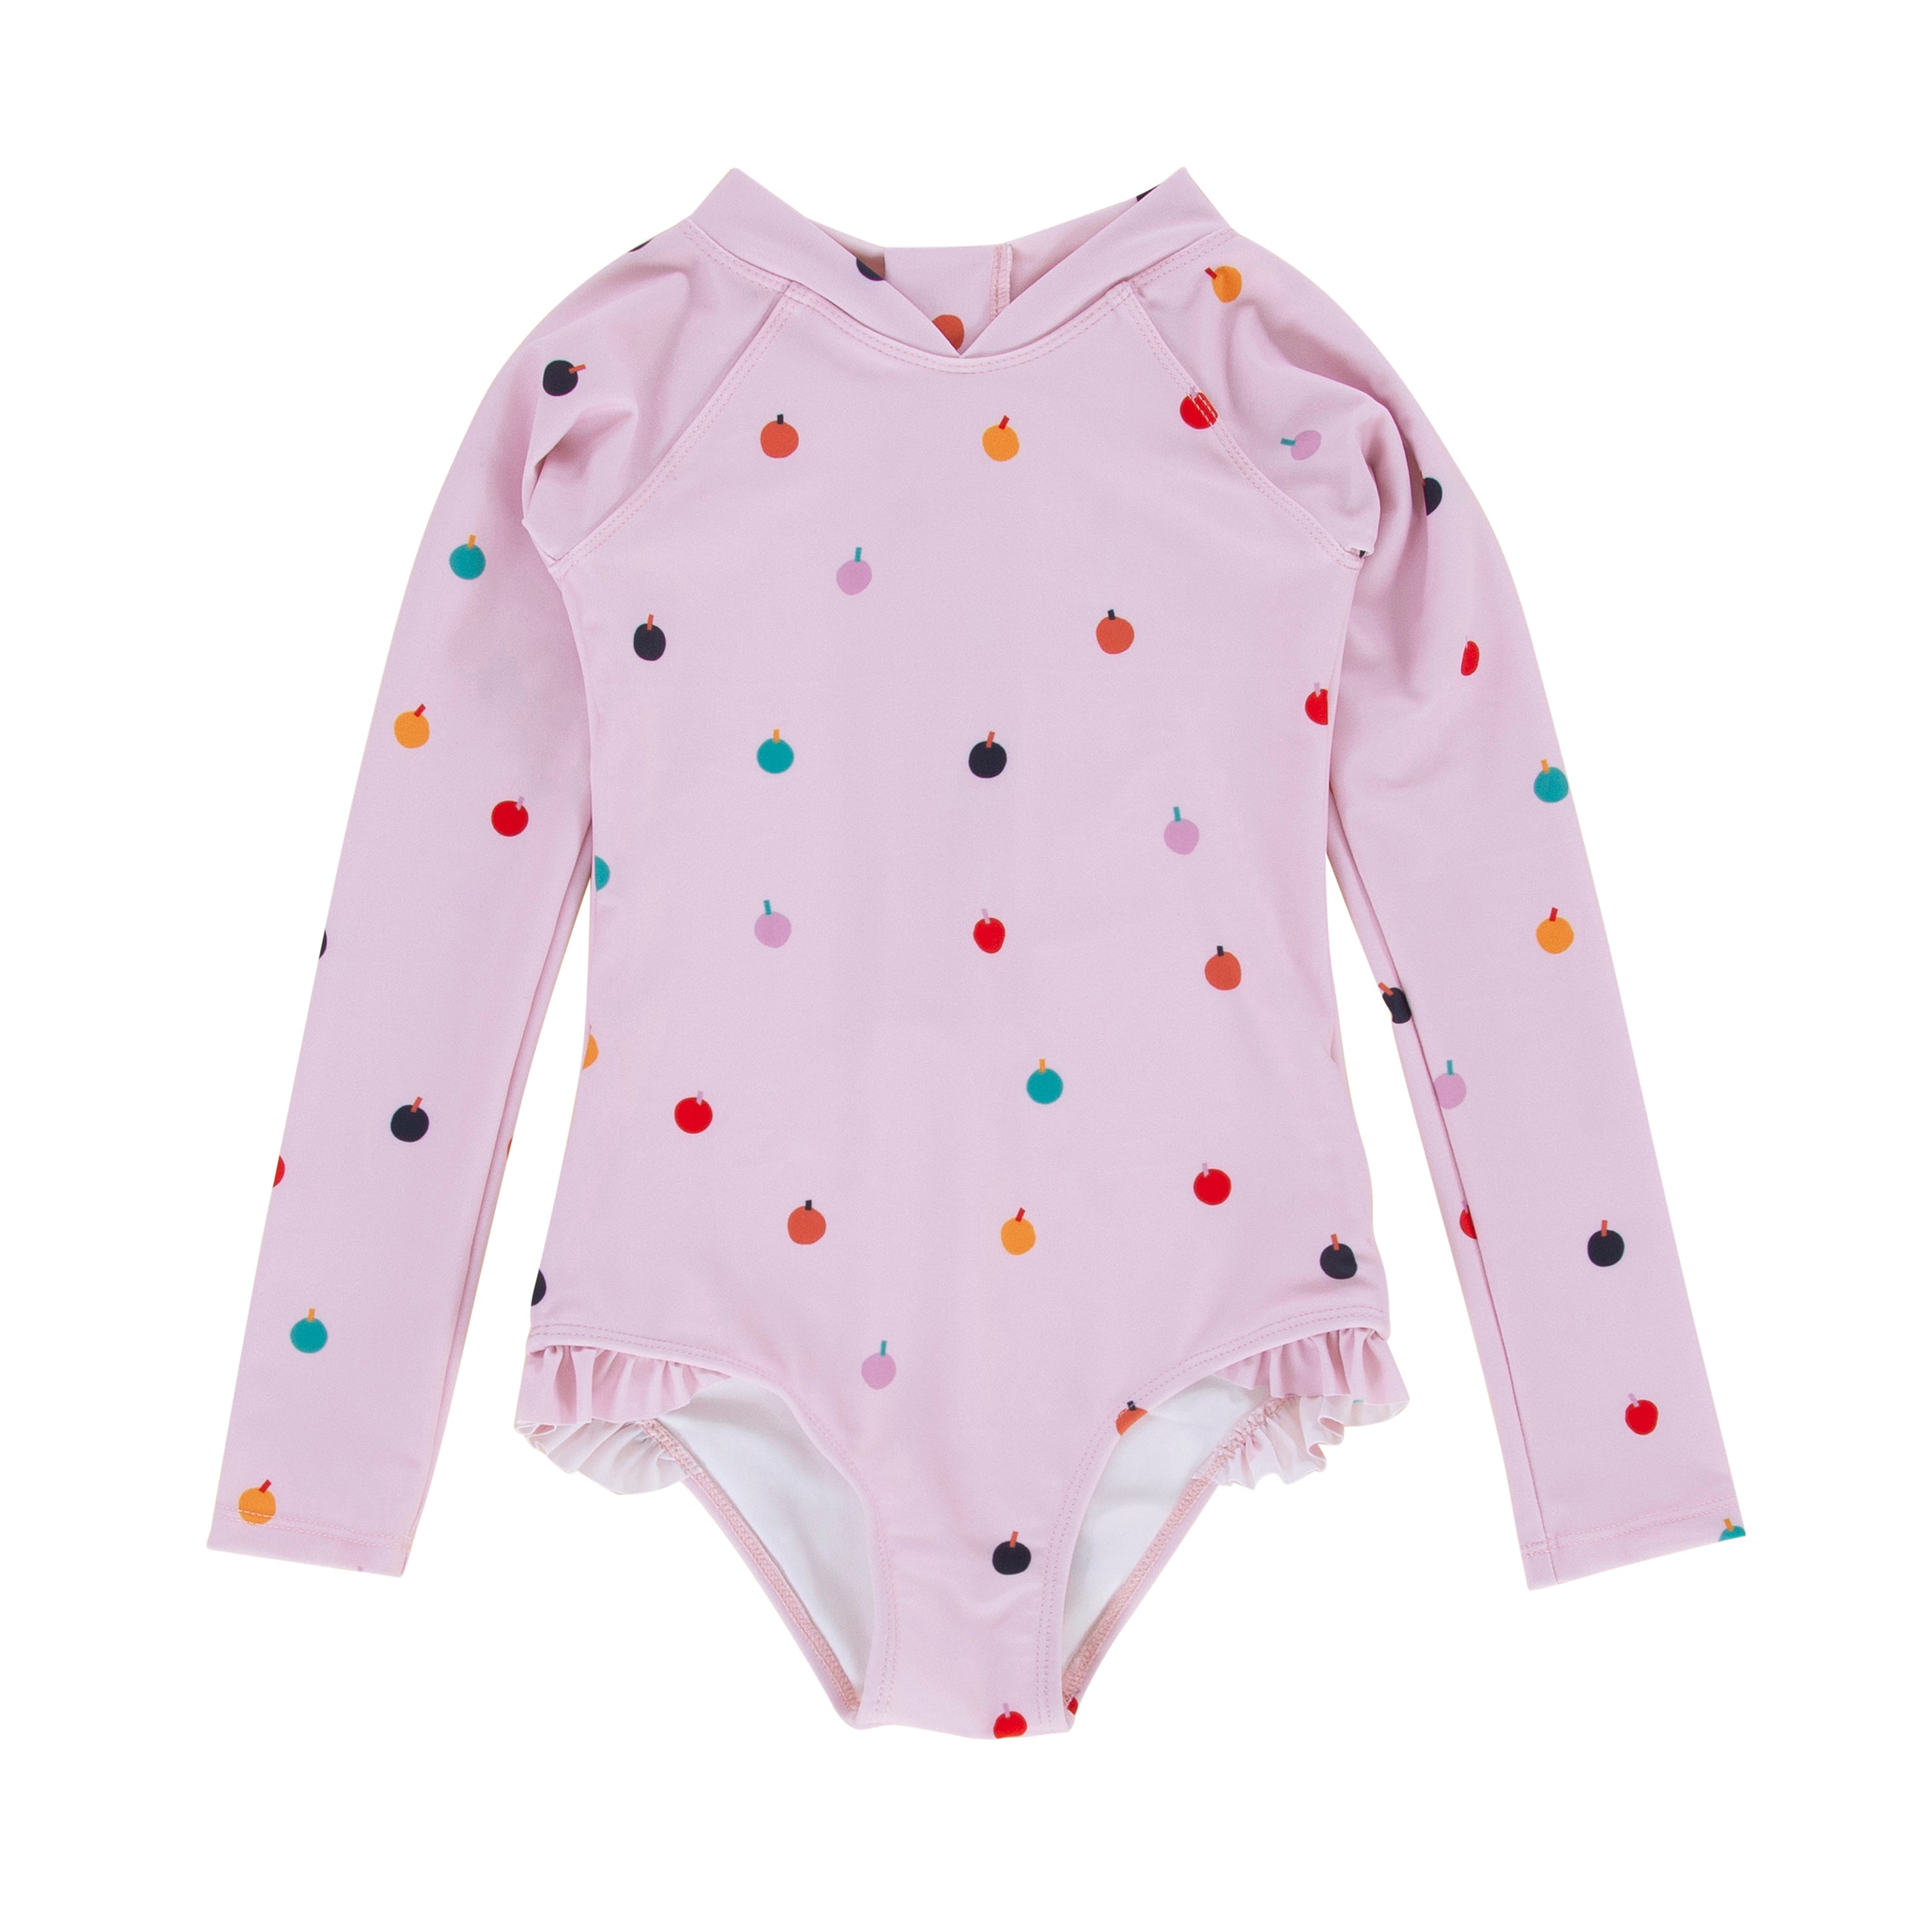 Peggy - Violet Long Sleeve Swimsuit (Balloons Print)